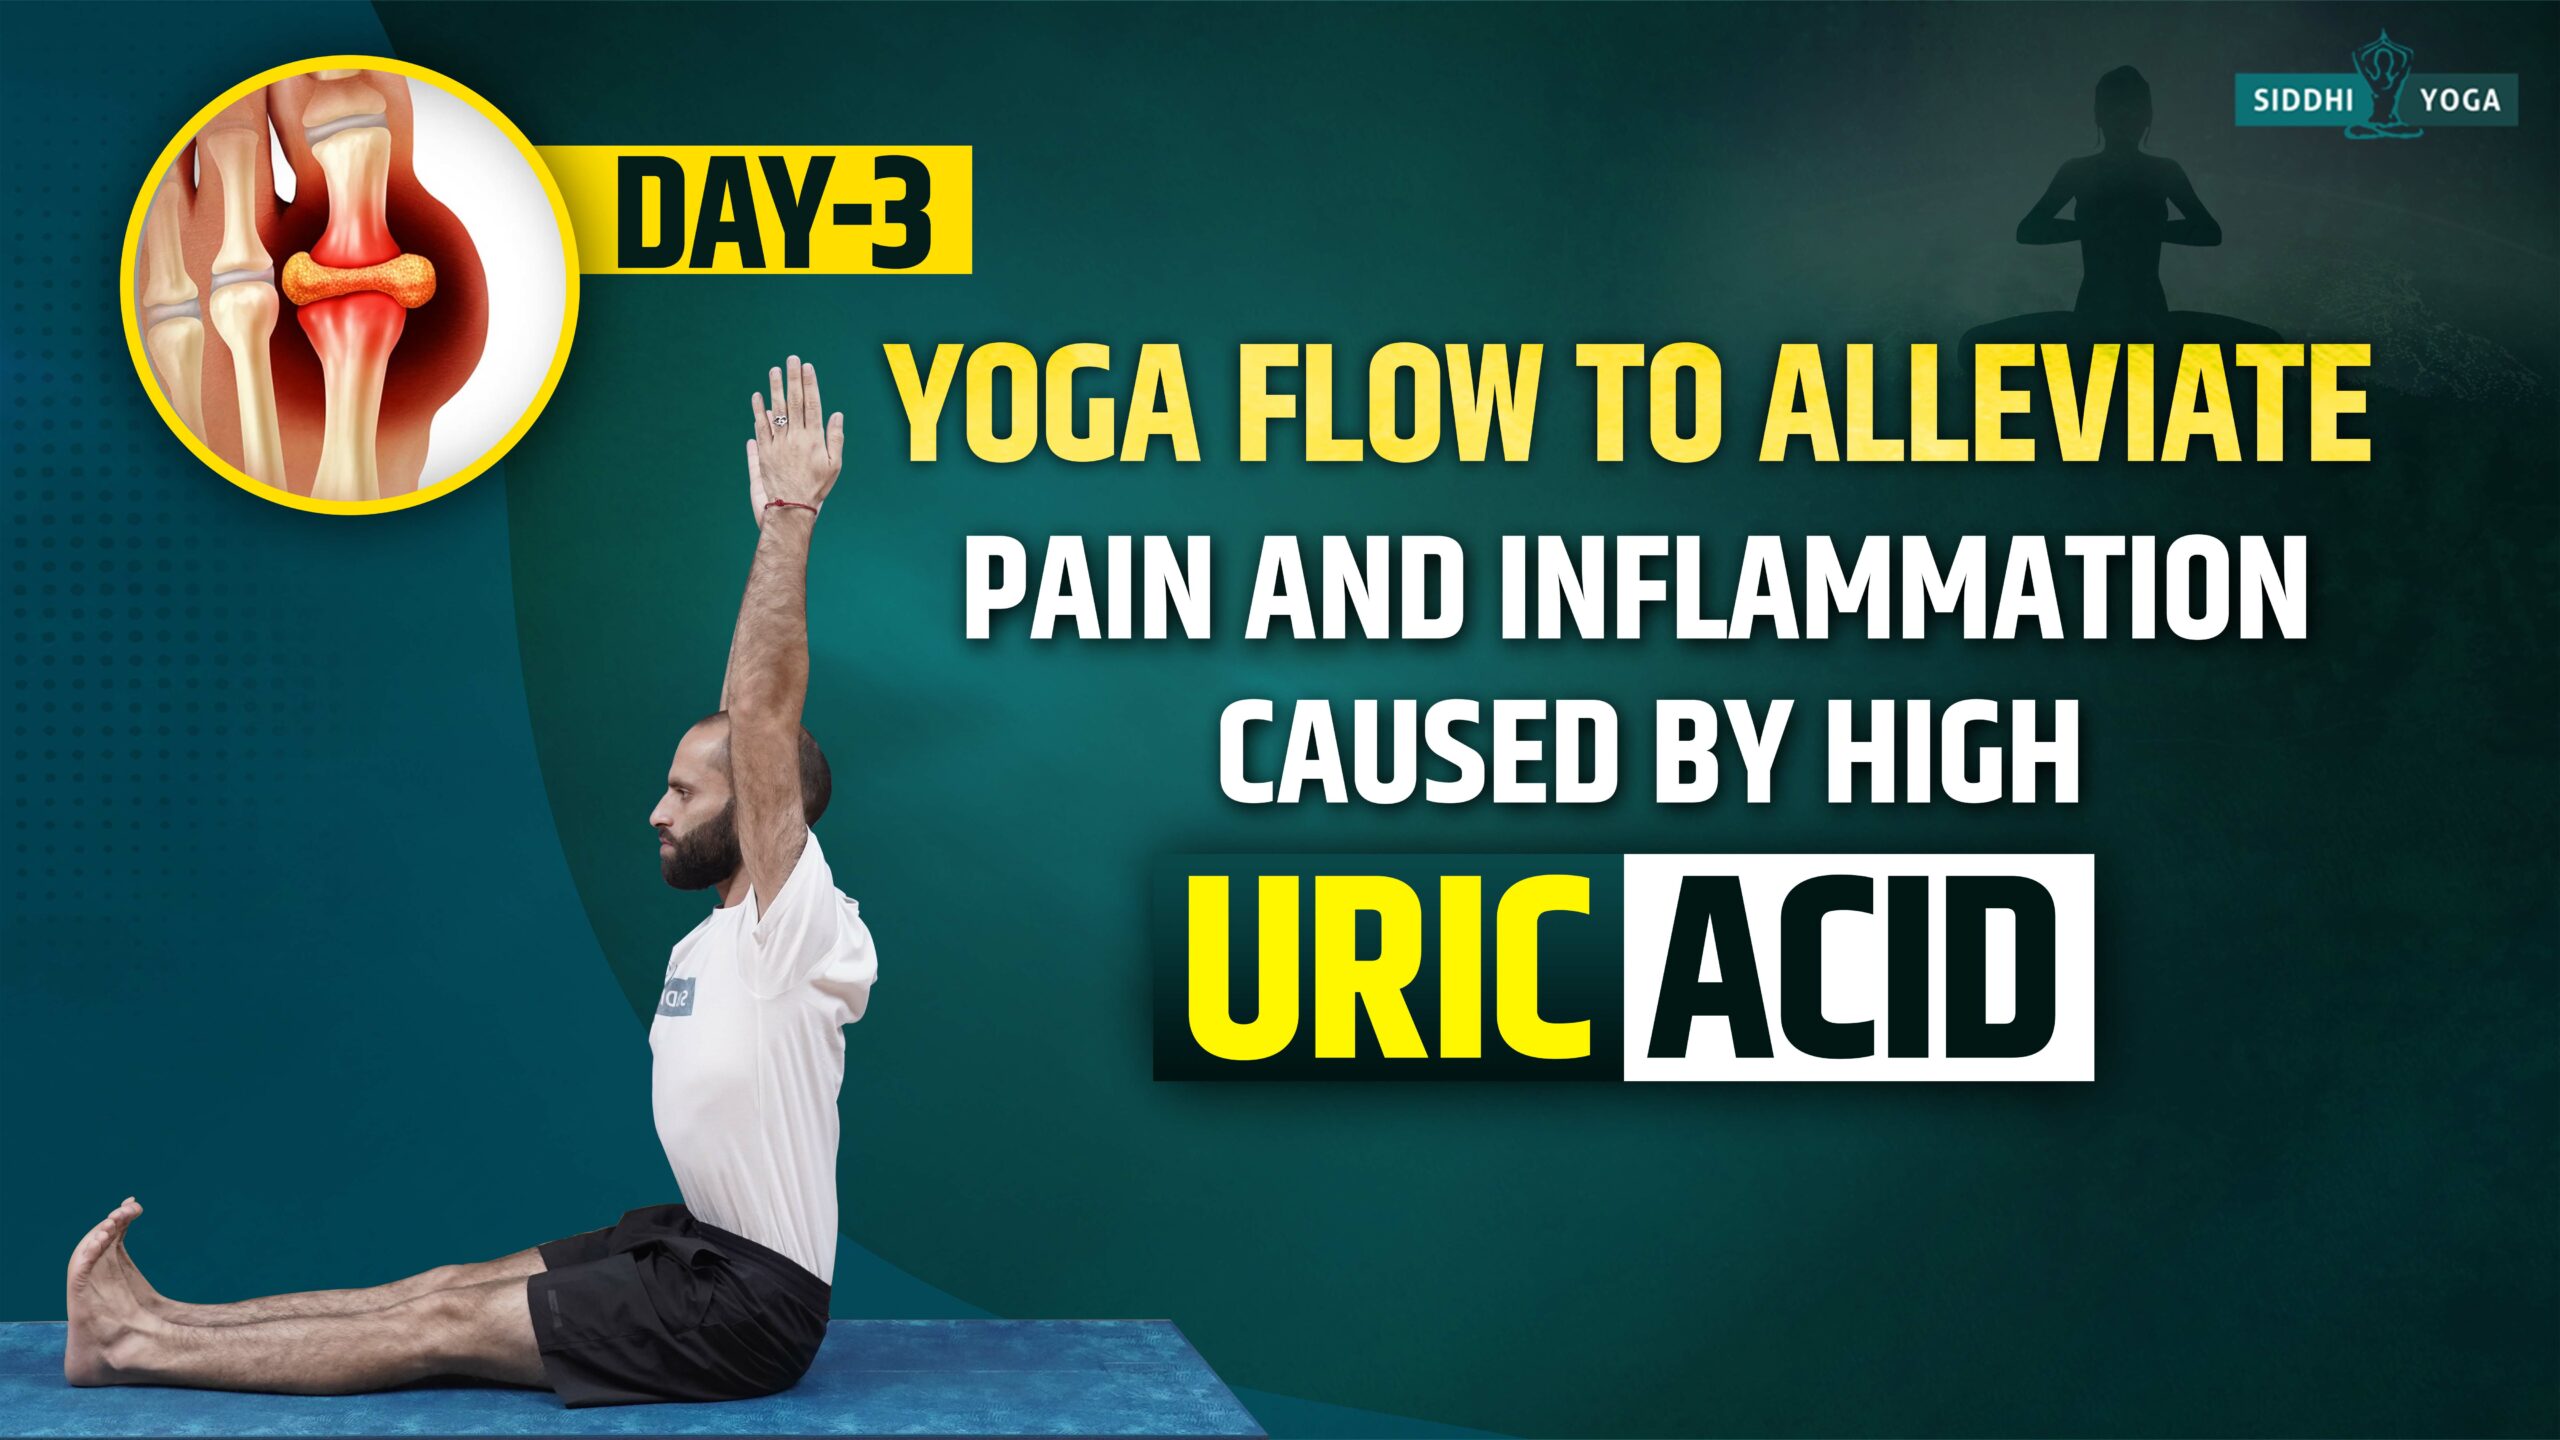 What are the natural remedies and yoga poses for indigestion and  flatulence? - Quora